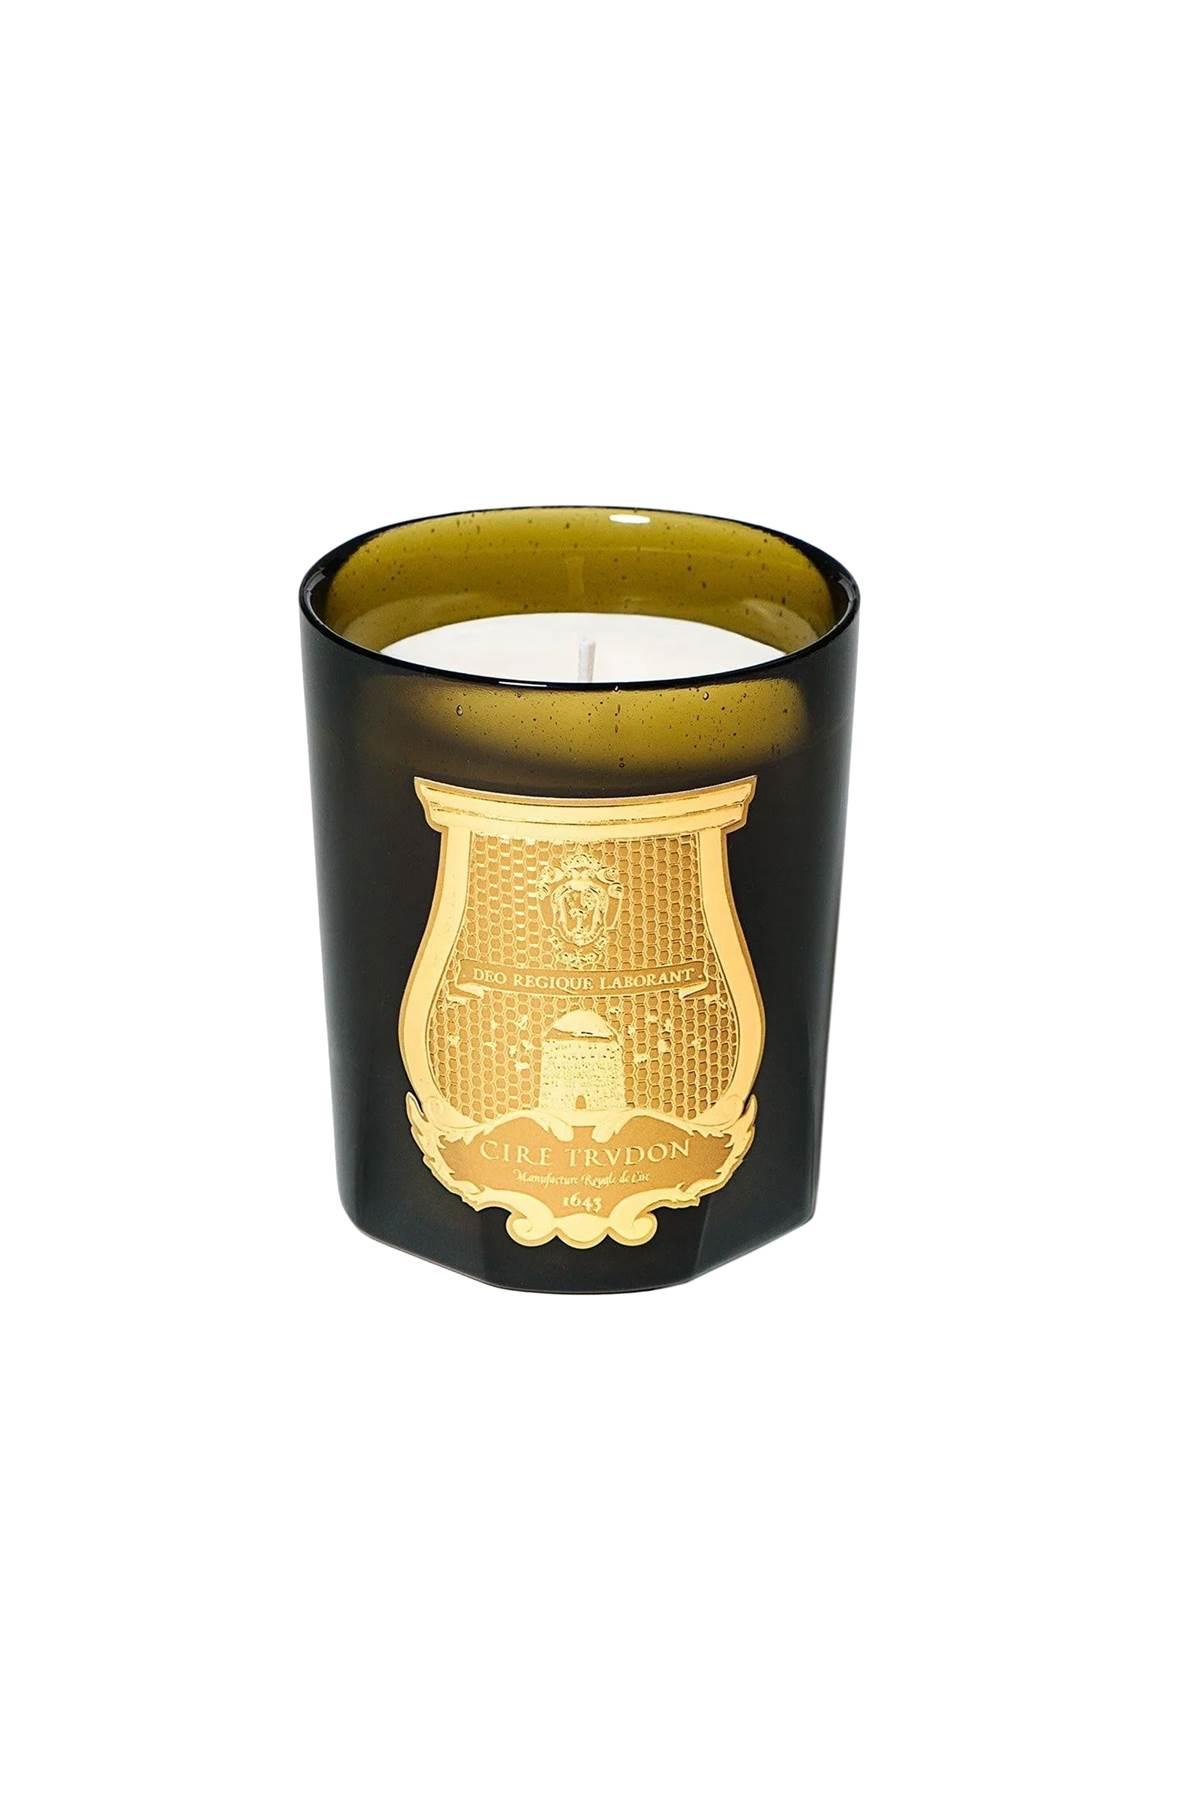 CIRE TRVDON CIRE TRVDON Scented candle "Holy Spirit" -